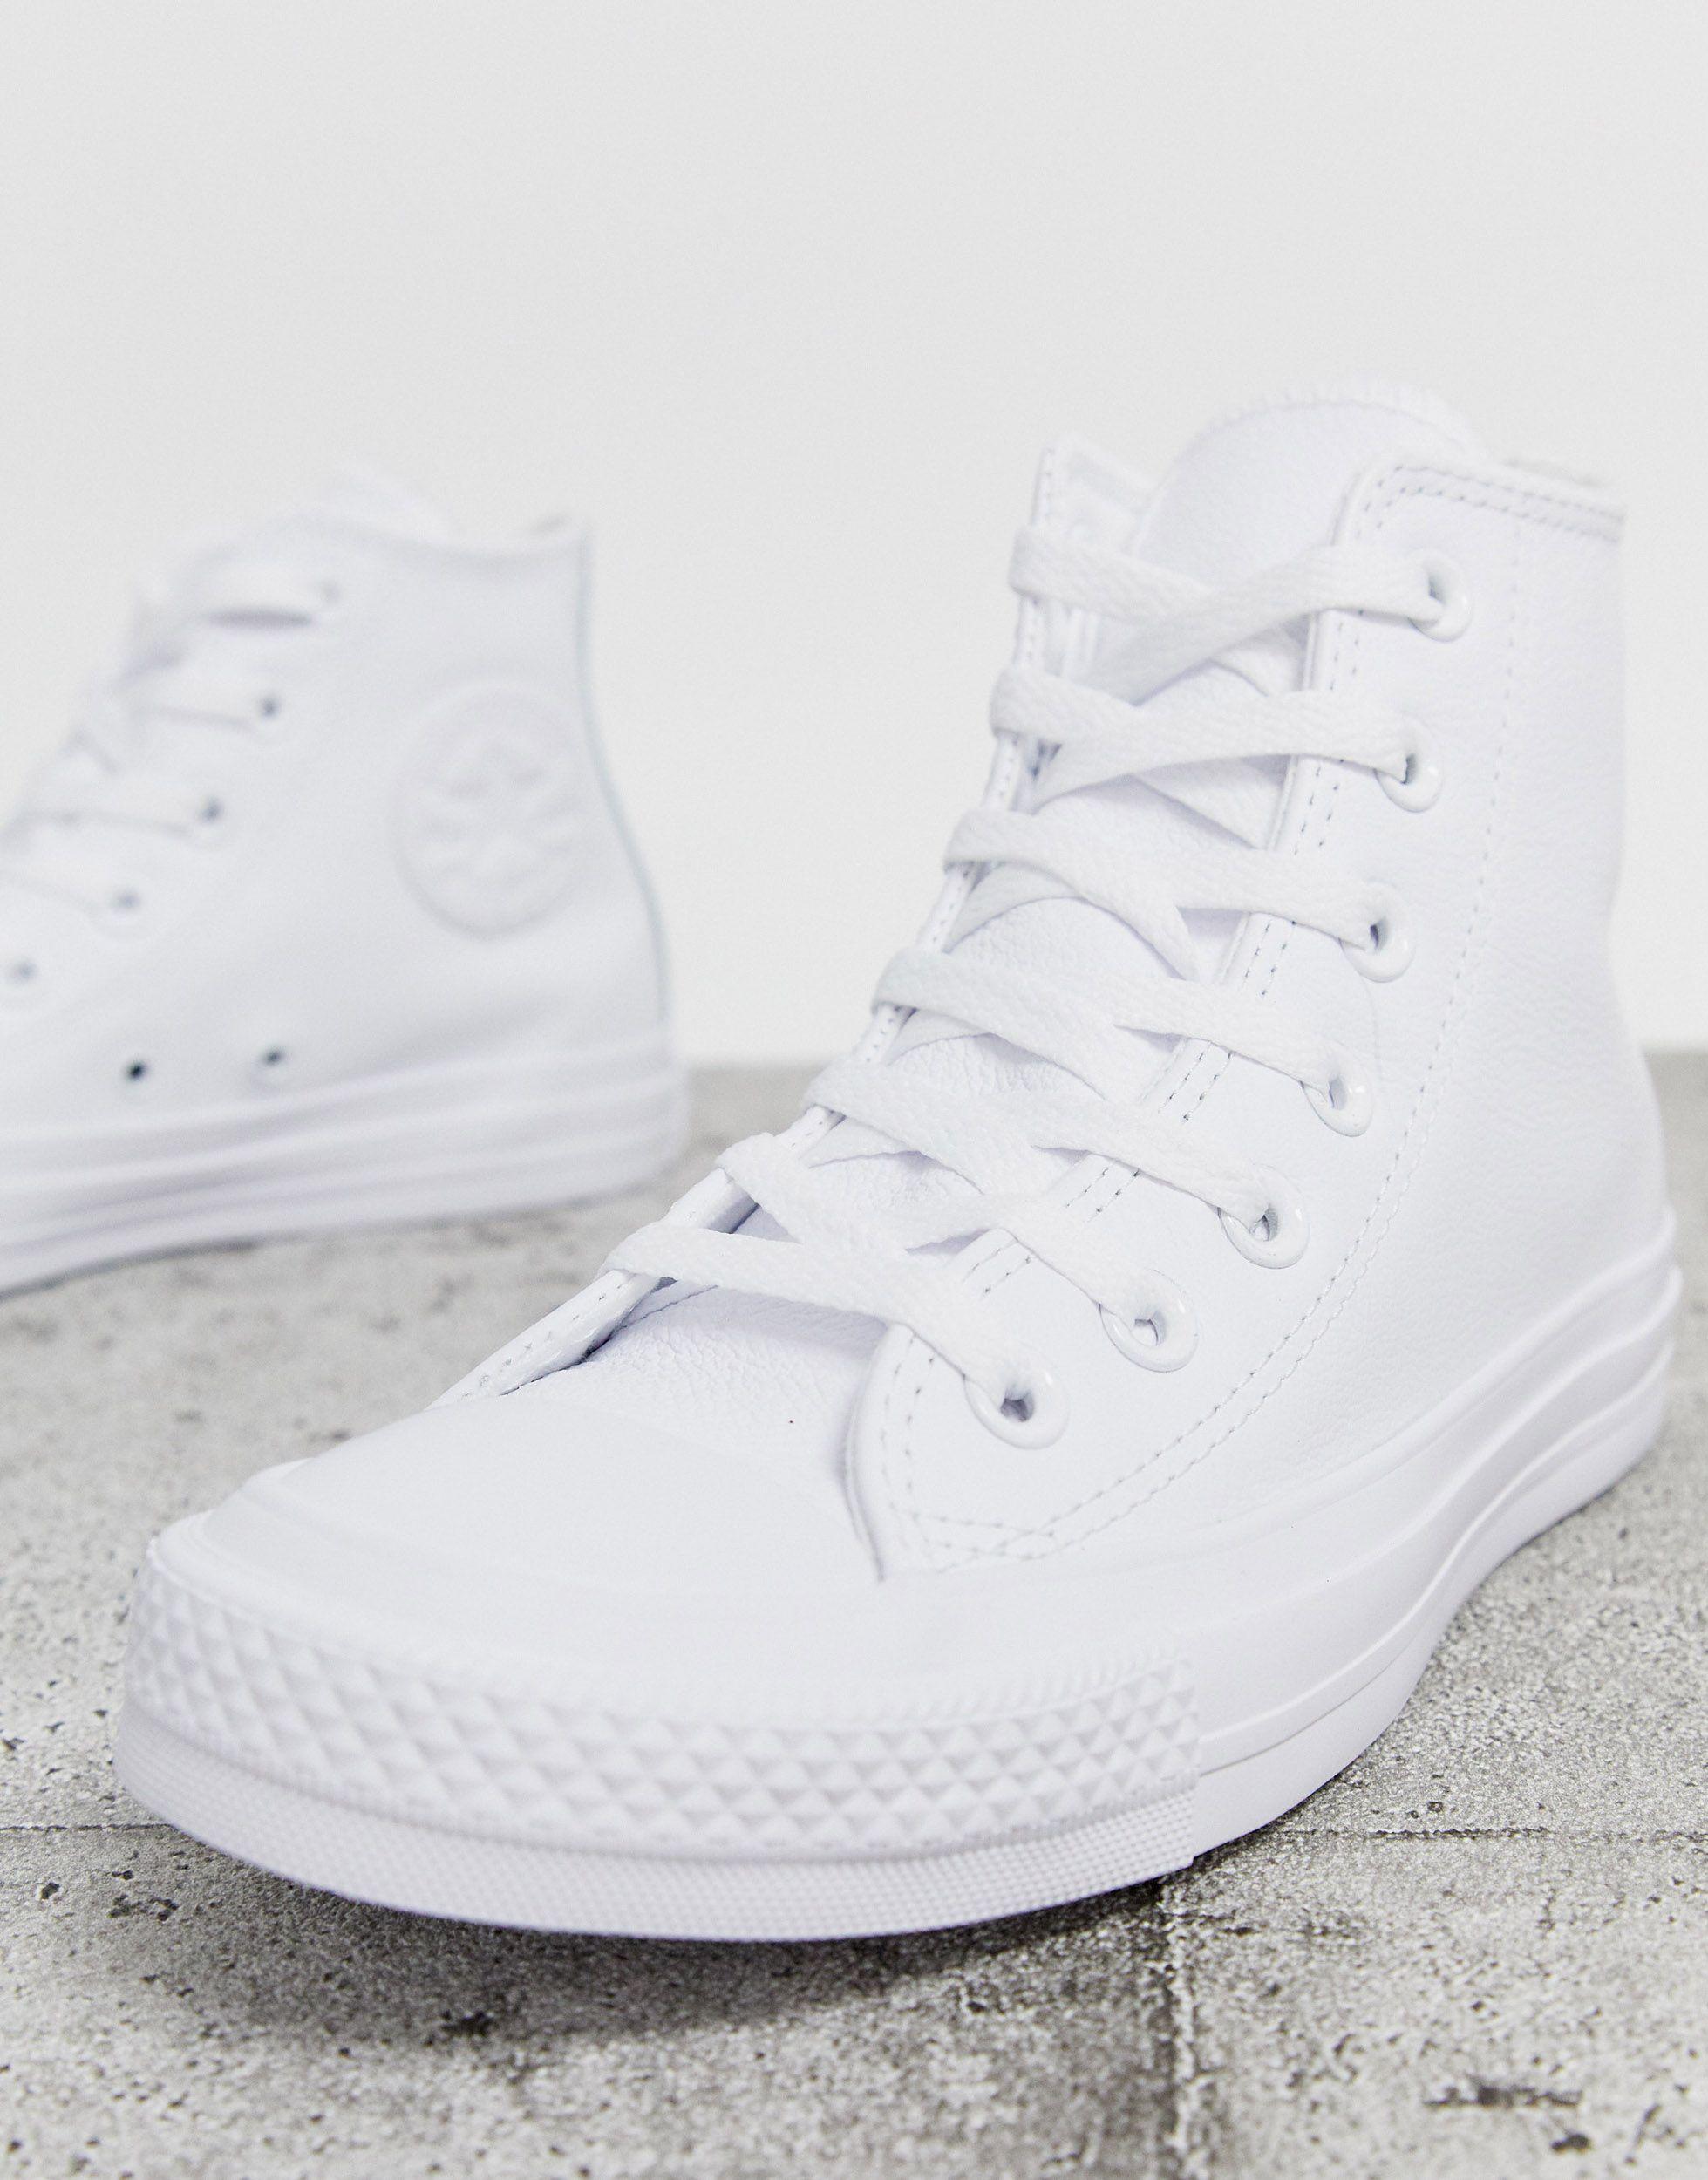 Skim nedbryder Susteen Converse Chuck Taylor Hi Leather White Monochrome Trainers | Lyst